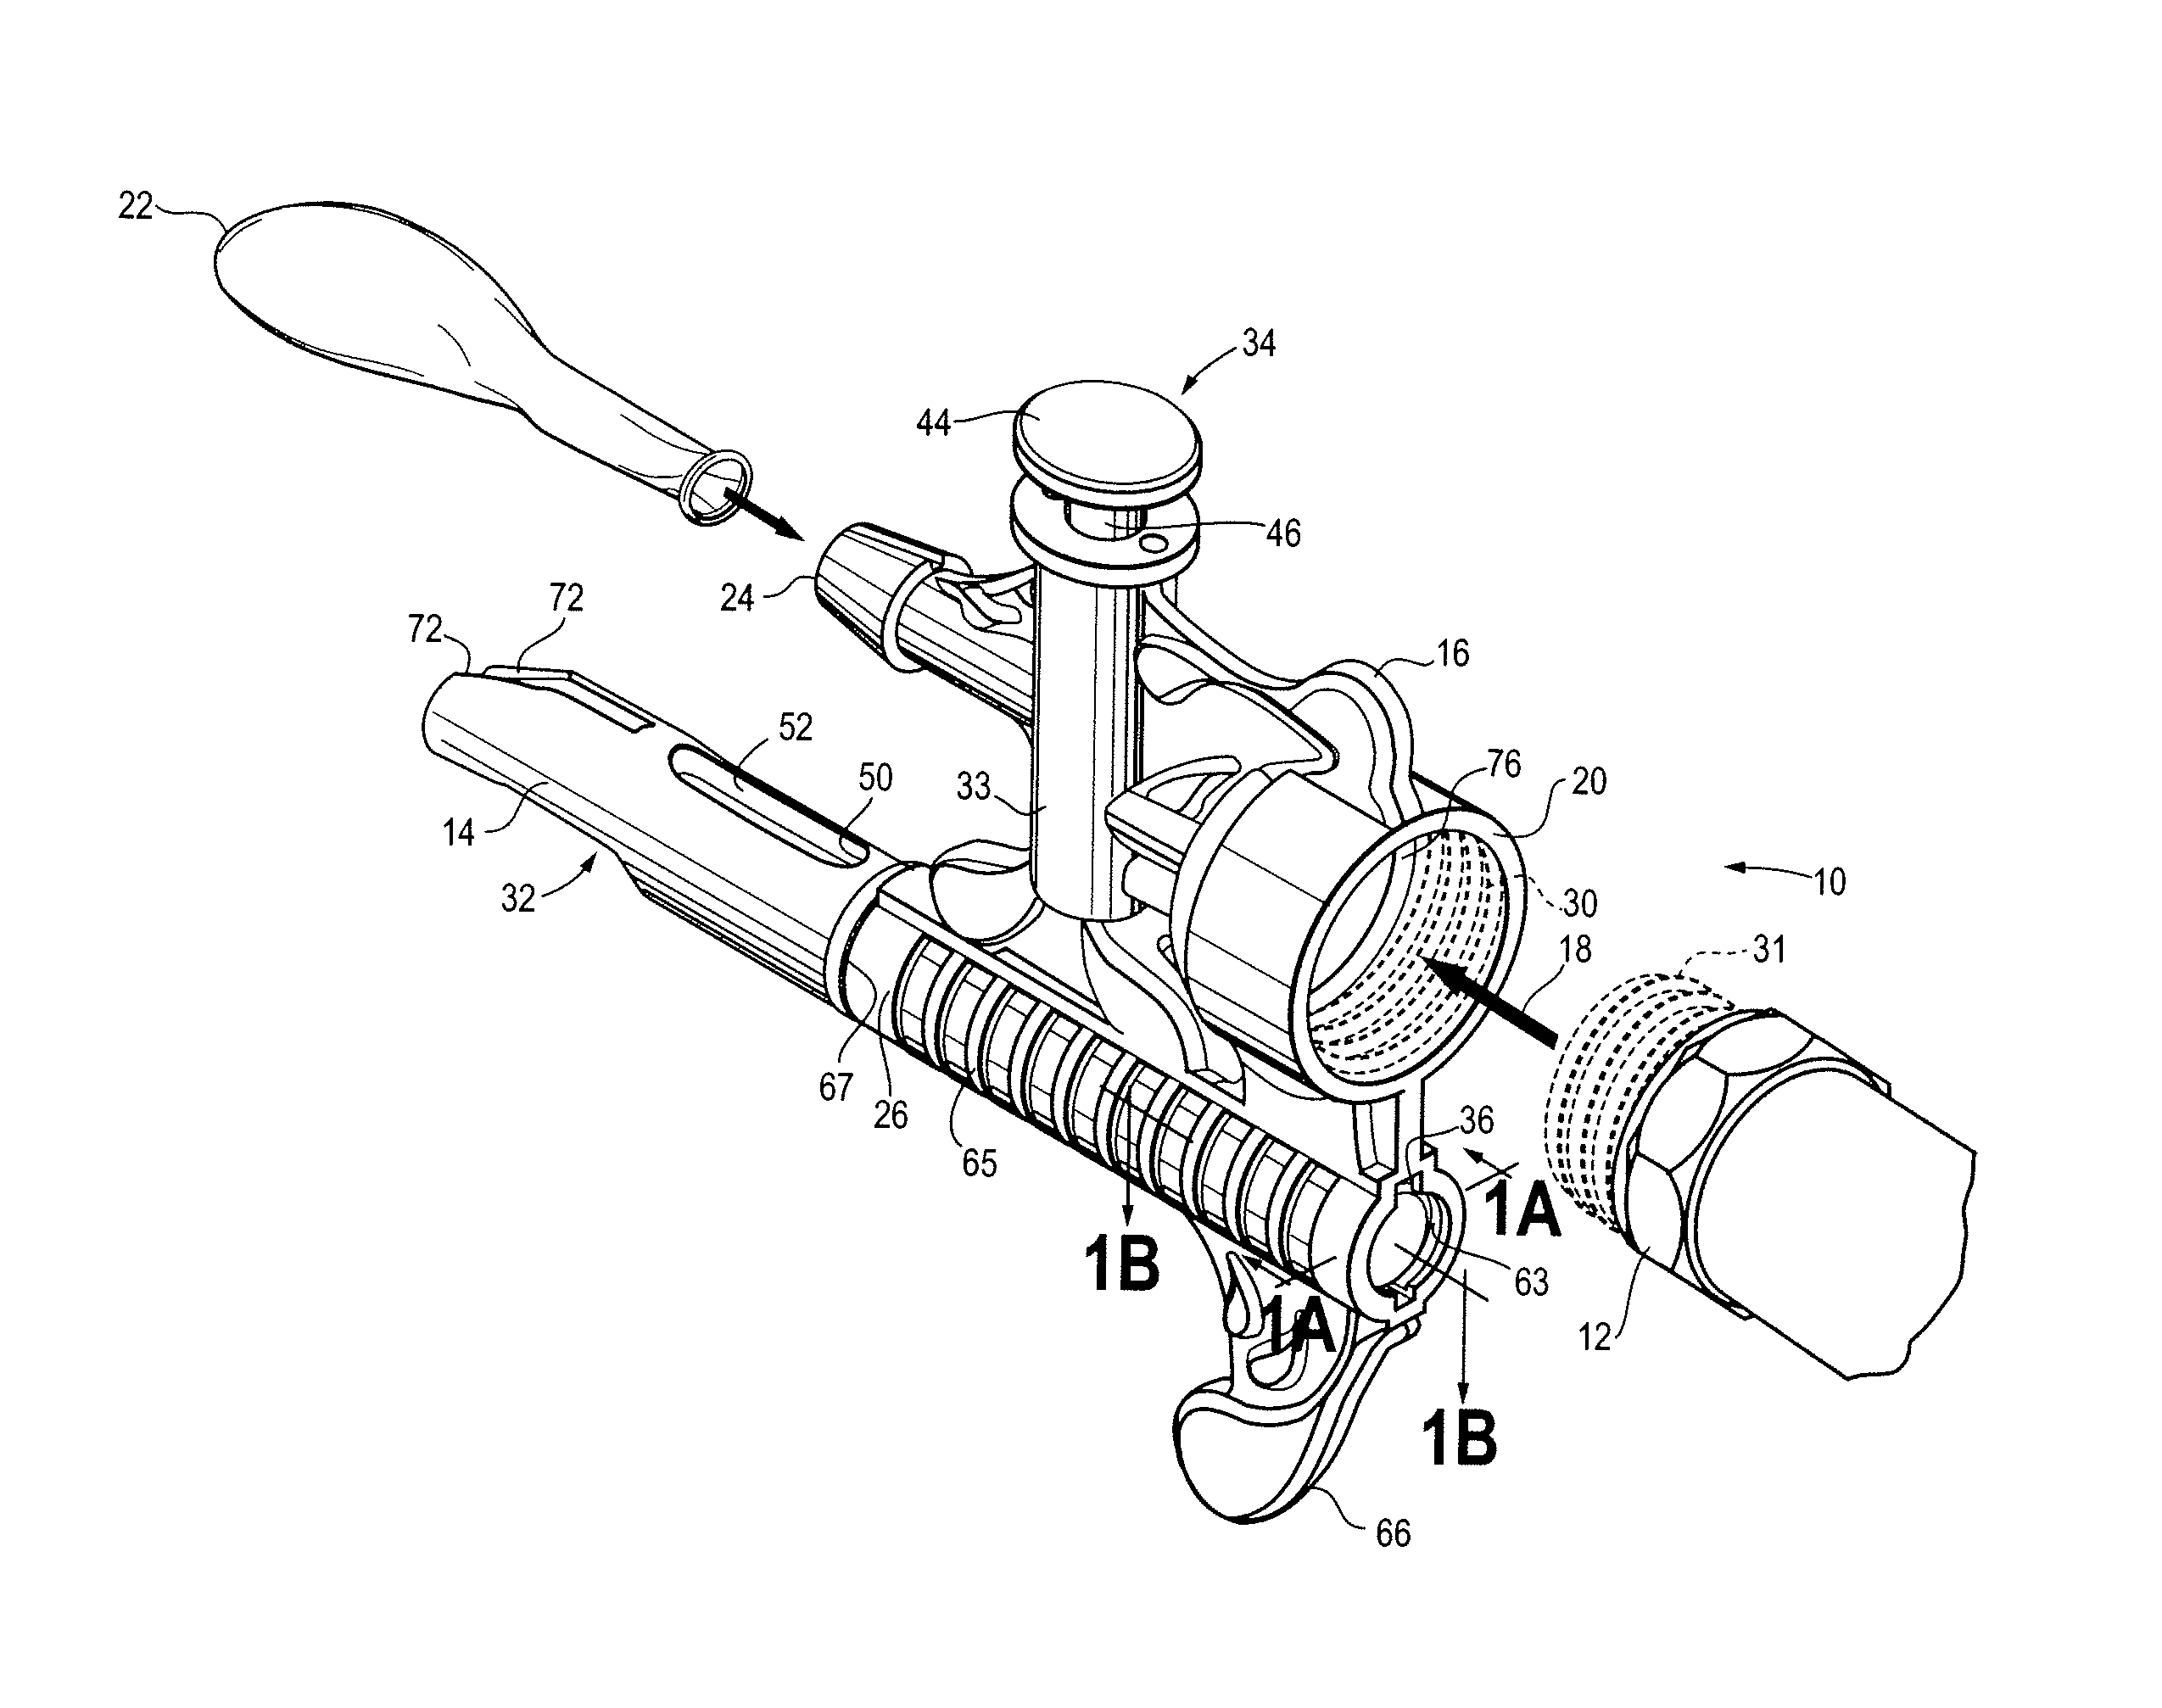 Balloon filling and tying device